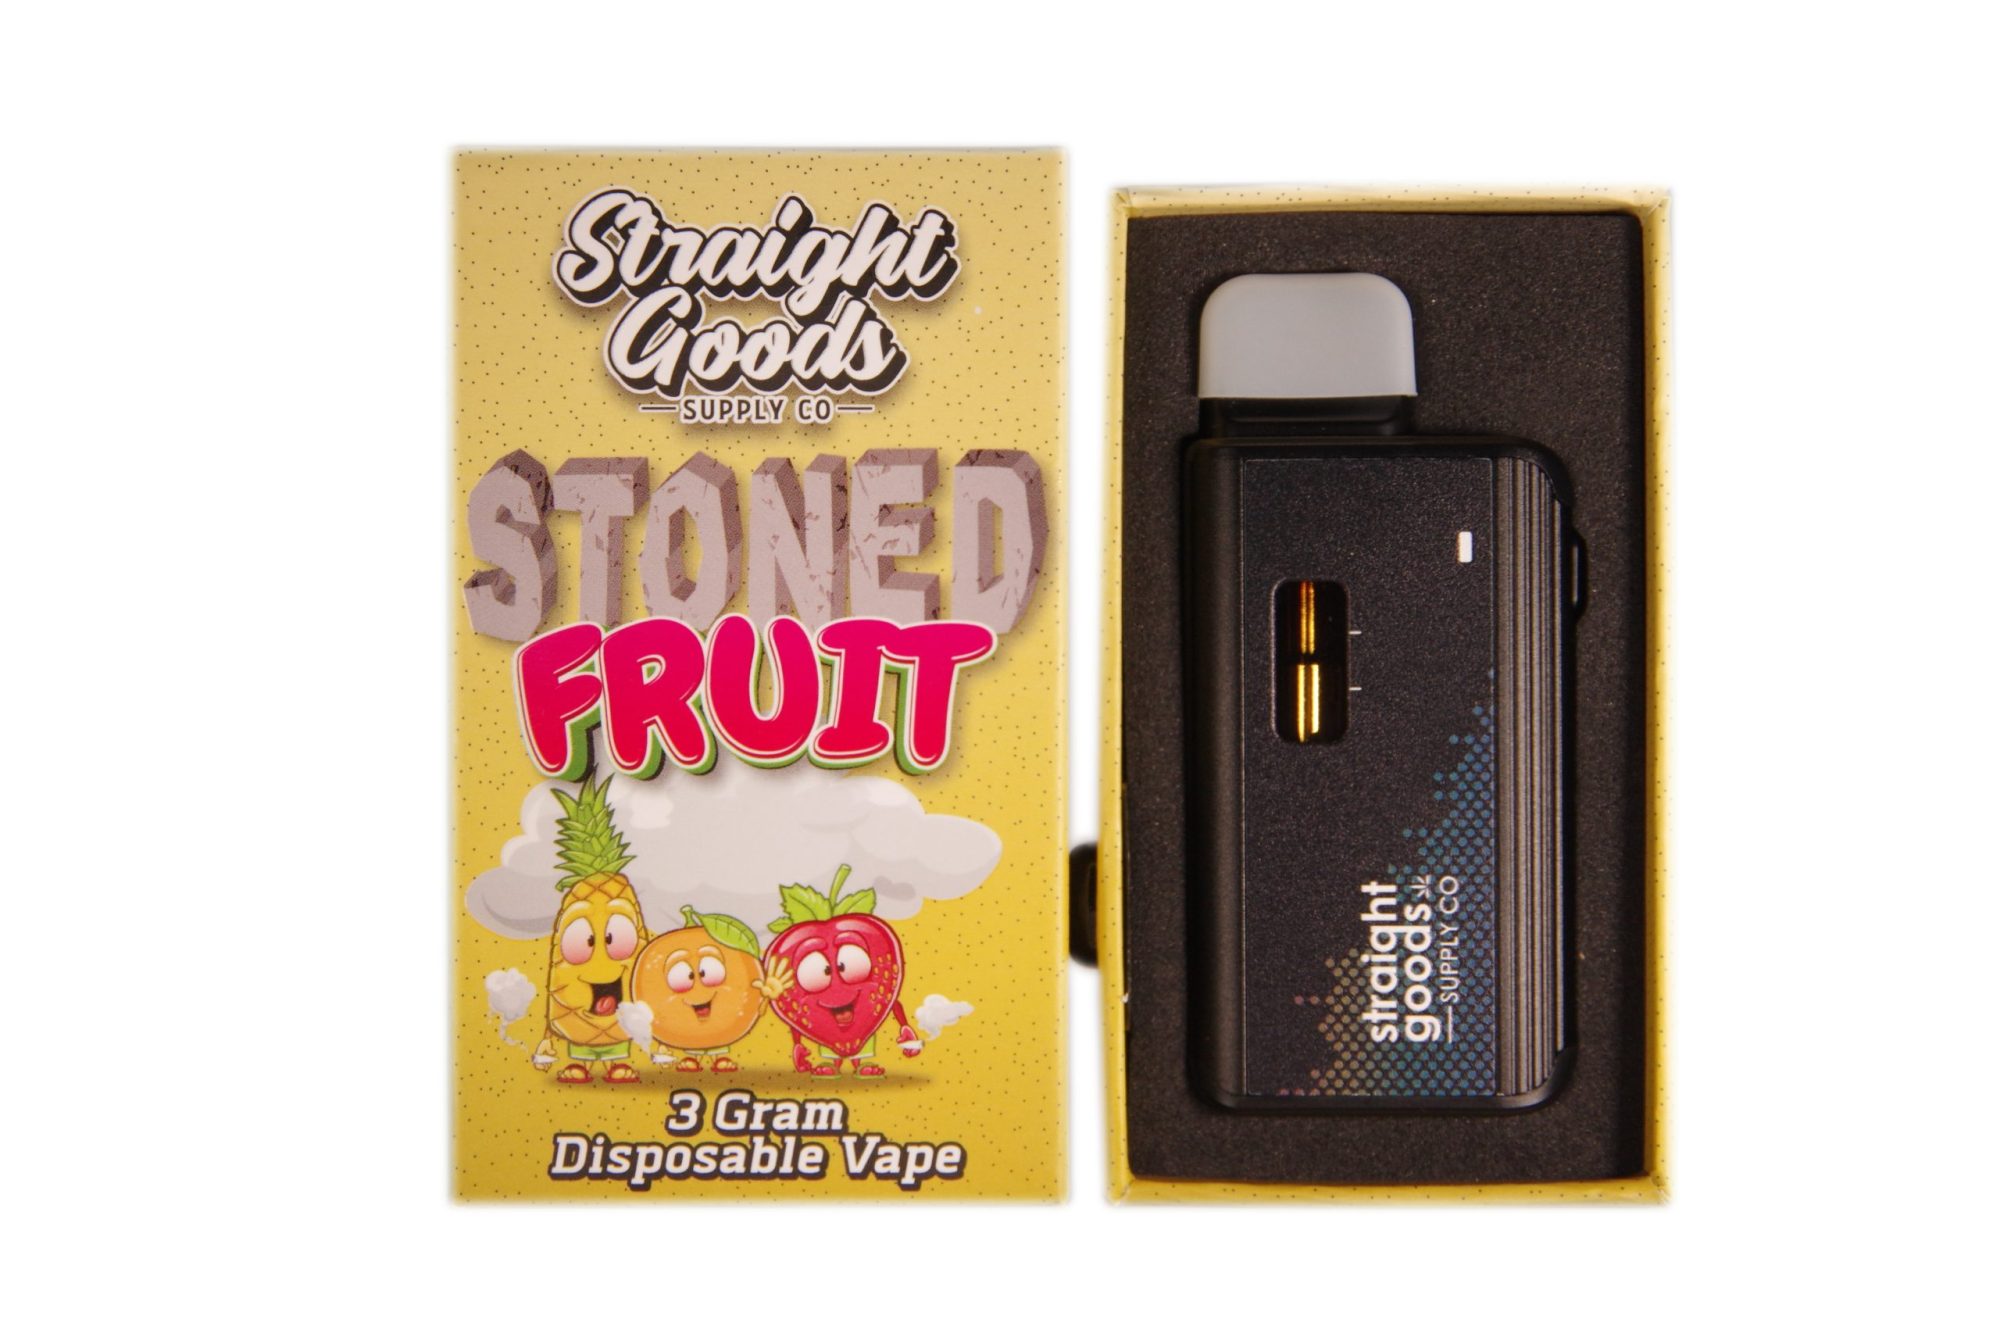 Buy Straight Goods - Stoned Fruit 3G Disposable Pen at Wccannabis Online Shop